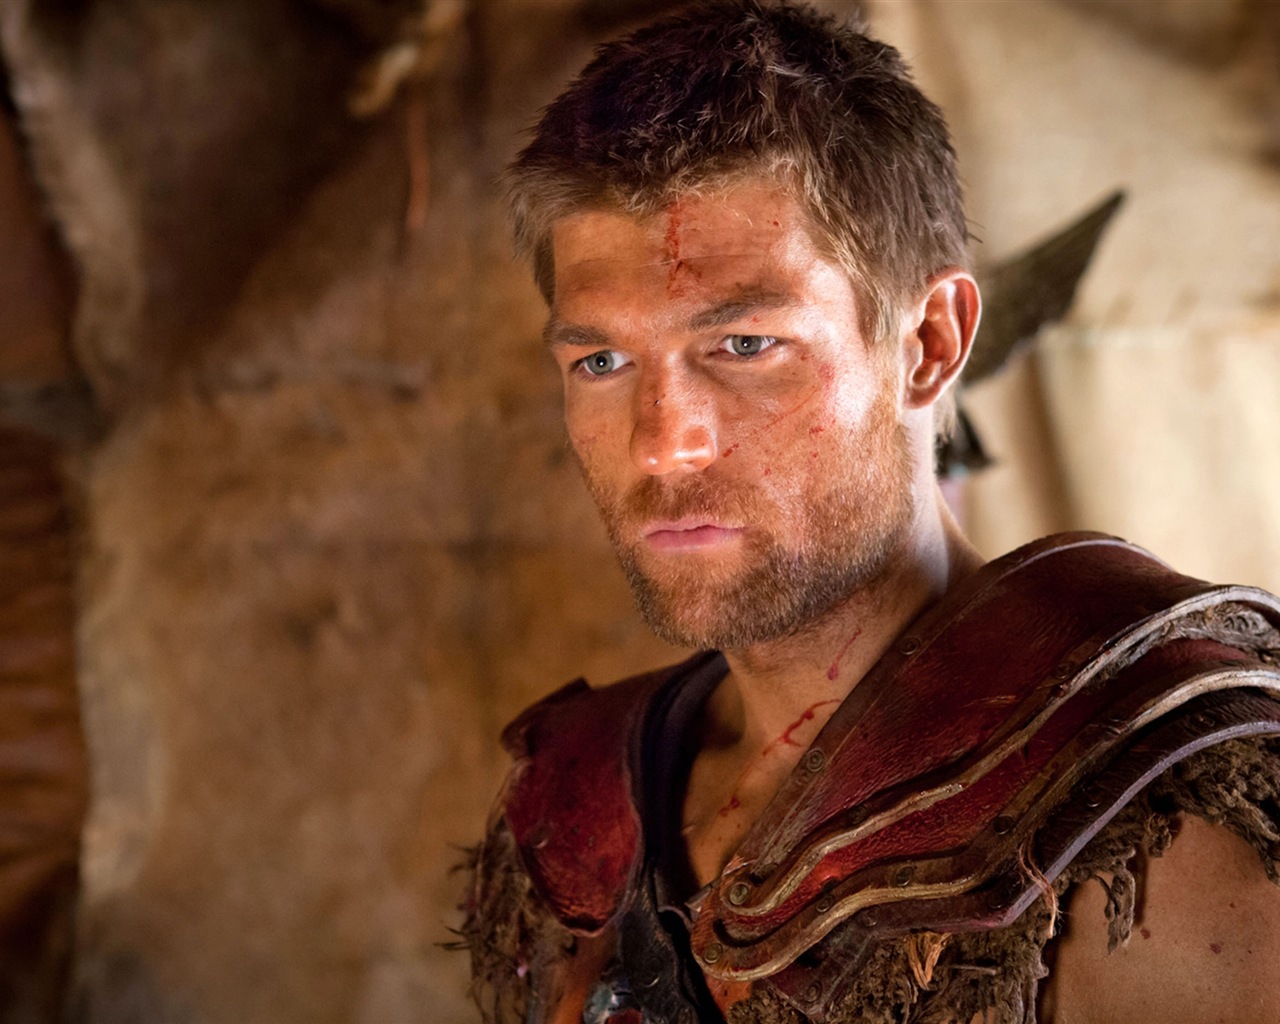 Spartacus: War of the Damned HD Wallpaper #10 - 1280x1024